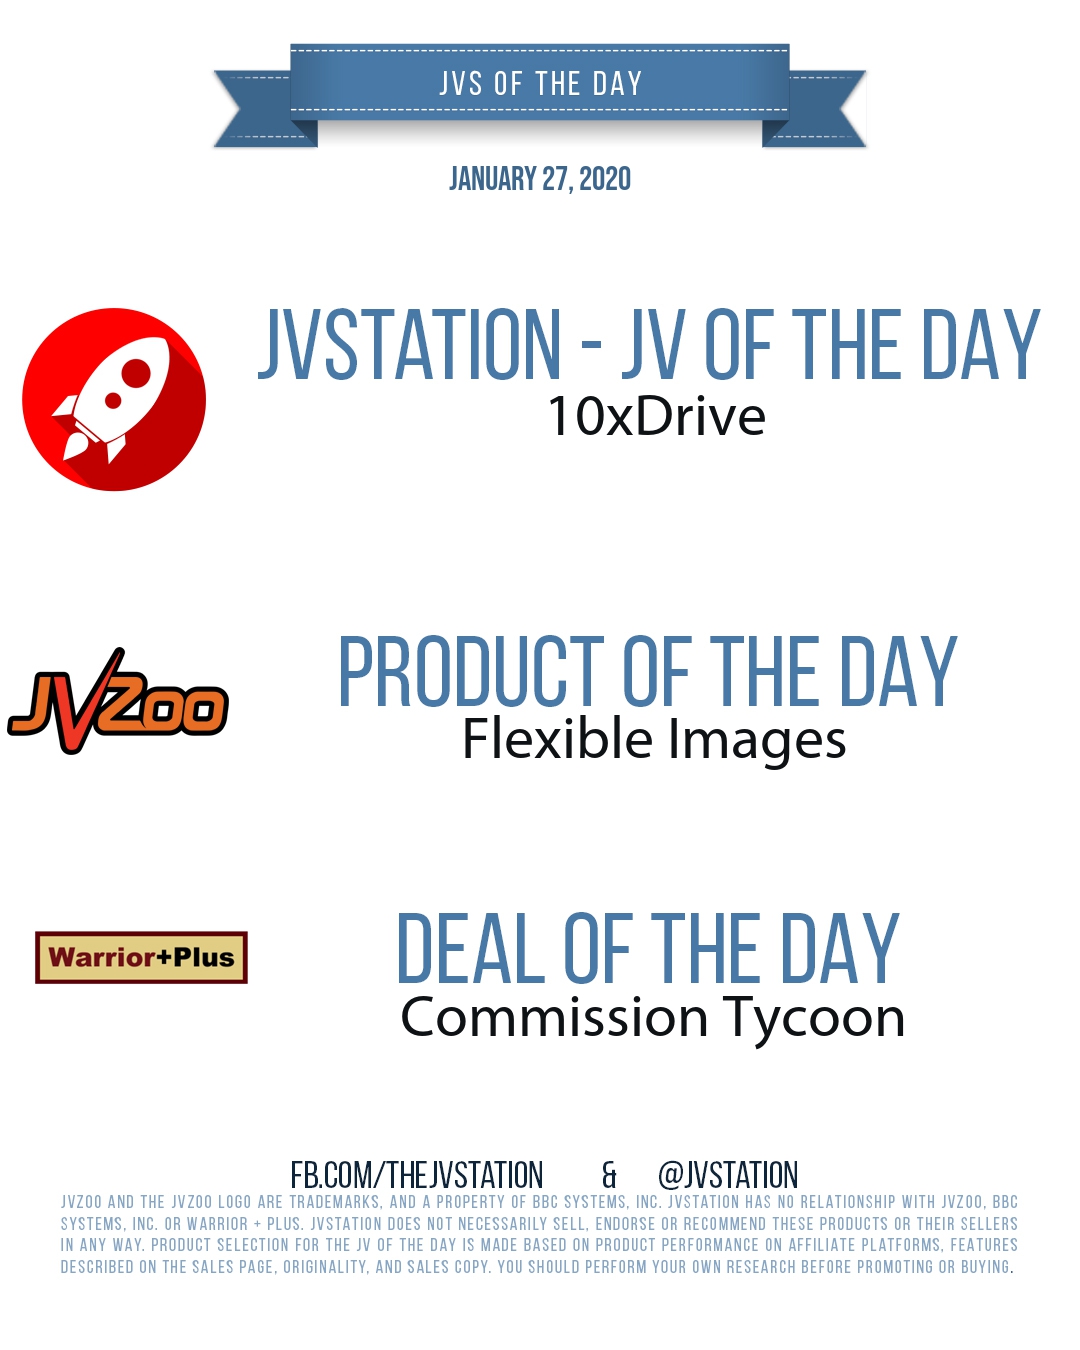 JVs of the day - January 27, 2020